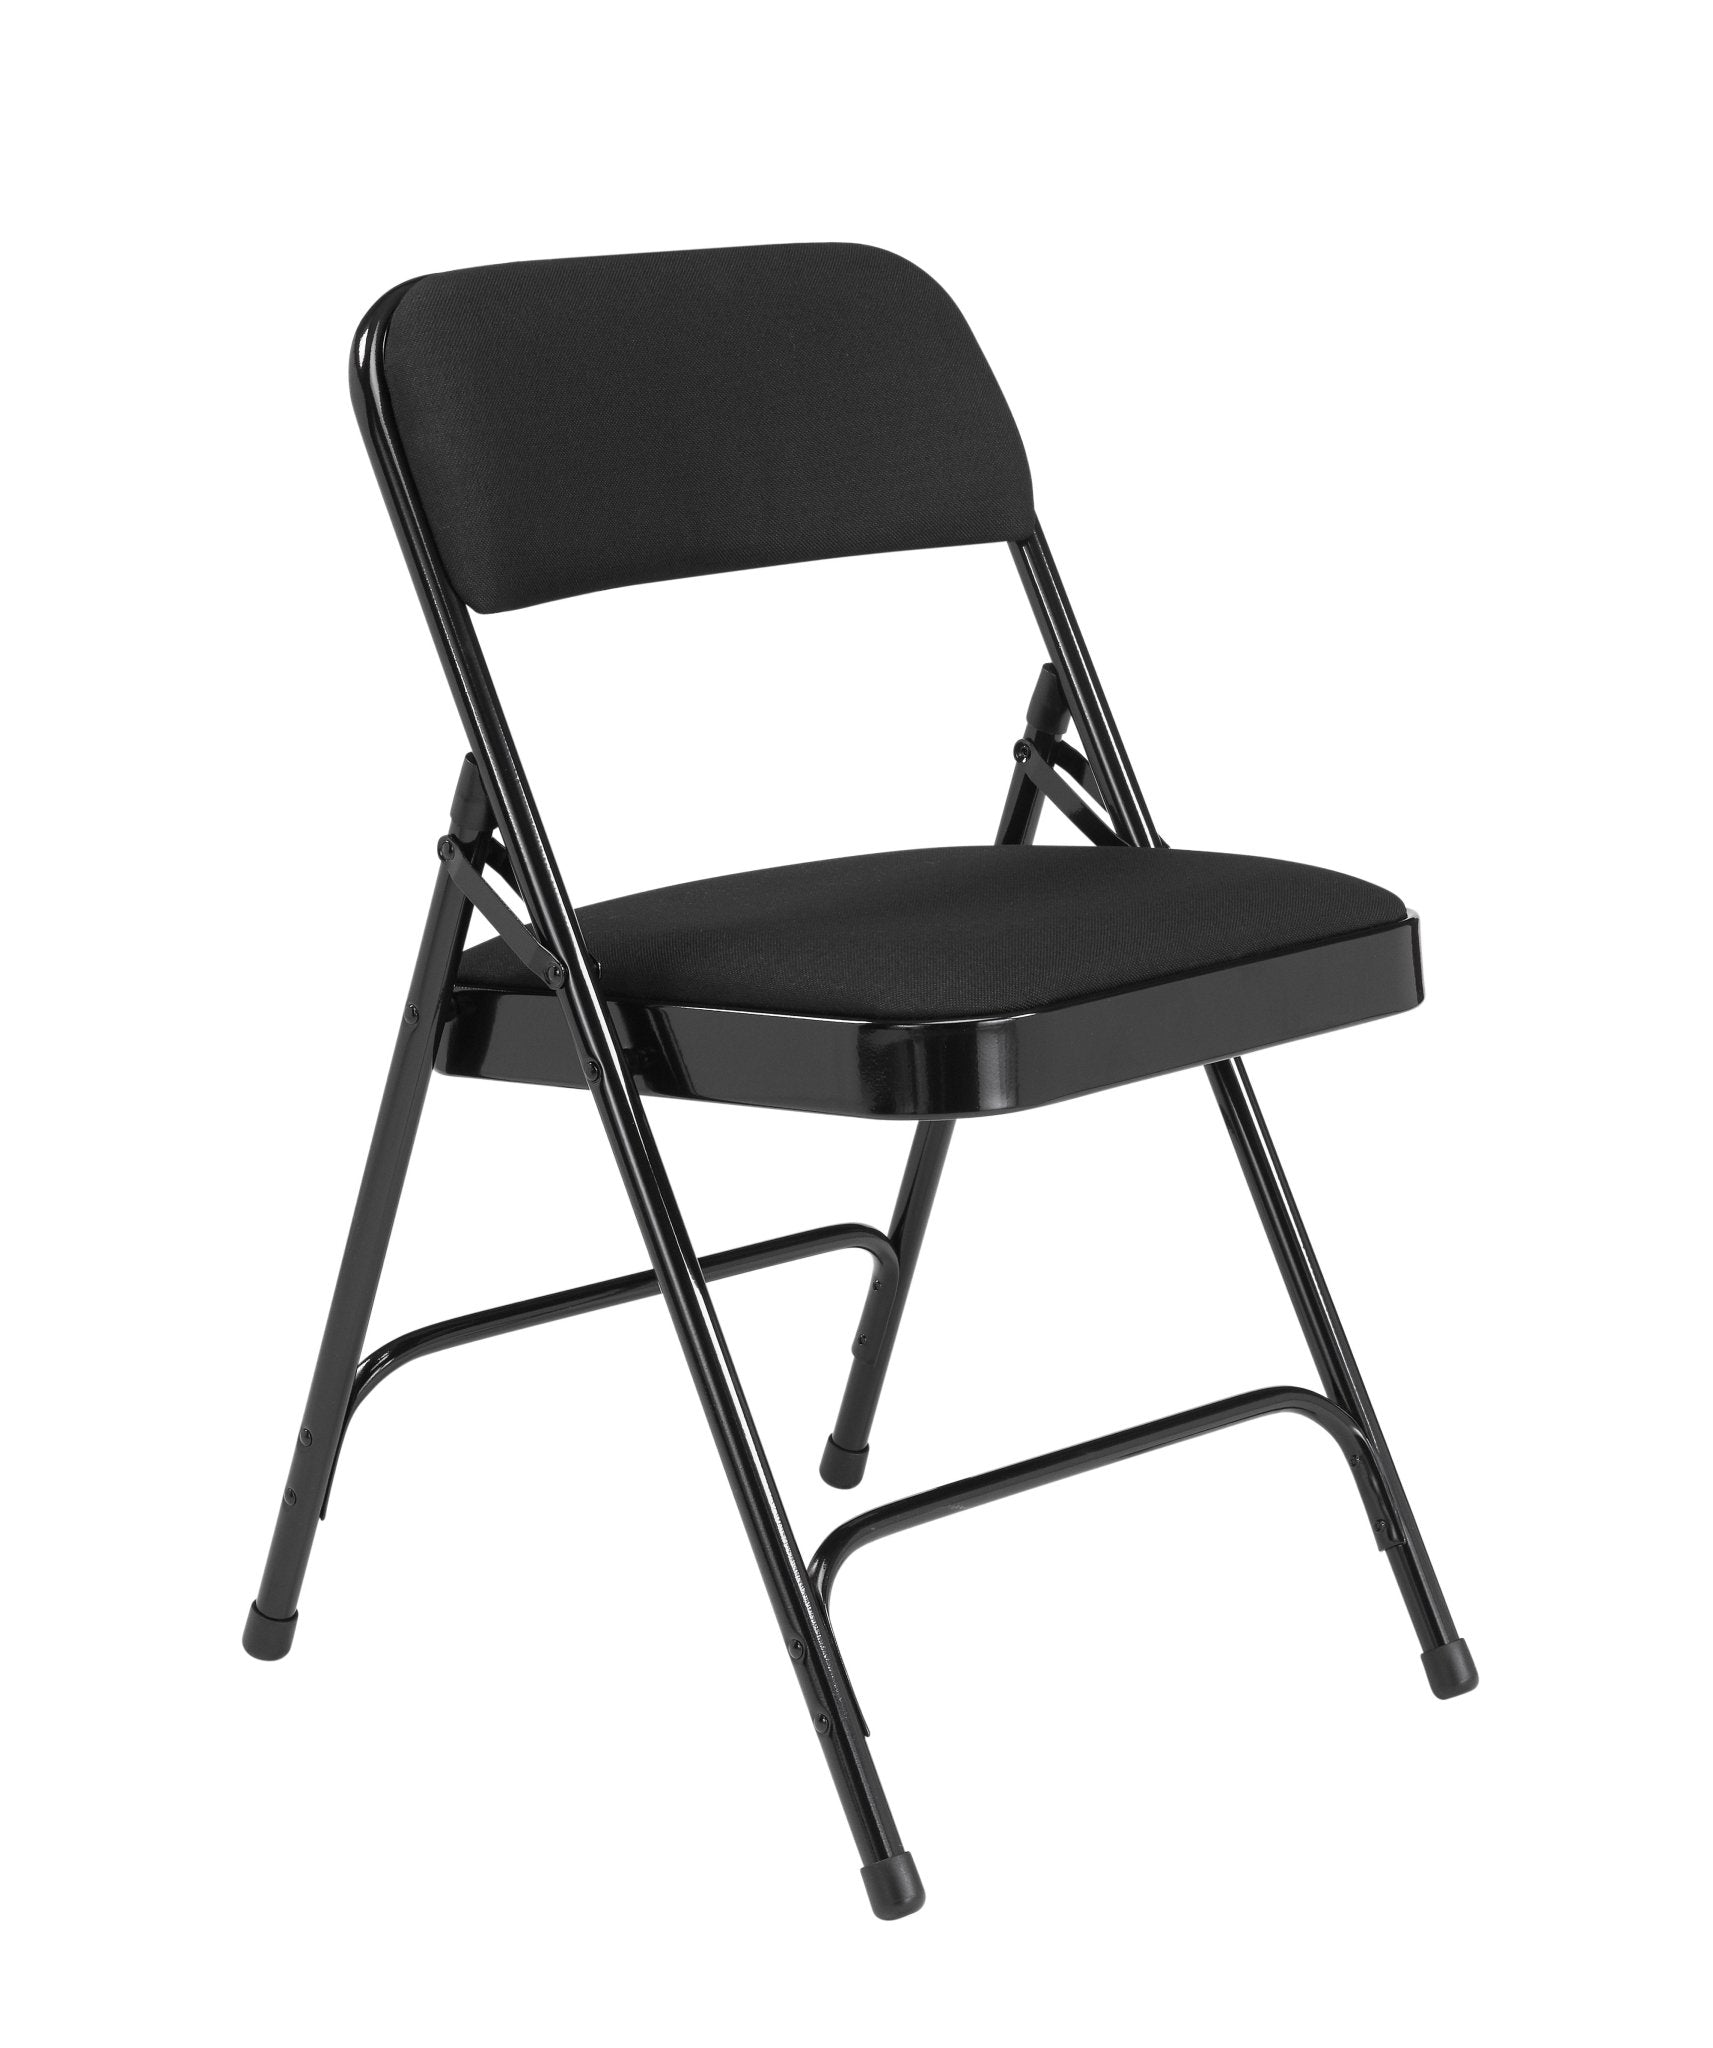 NPS 2200 Series Fabric Upholstered Premium Folding Chair (National Public Seating NPS-2200) - SchoolOutlet